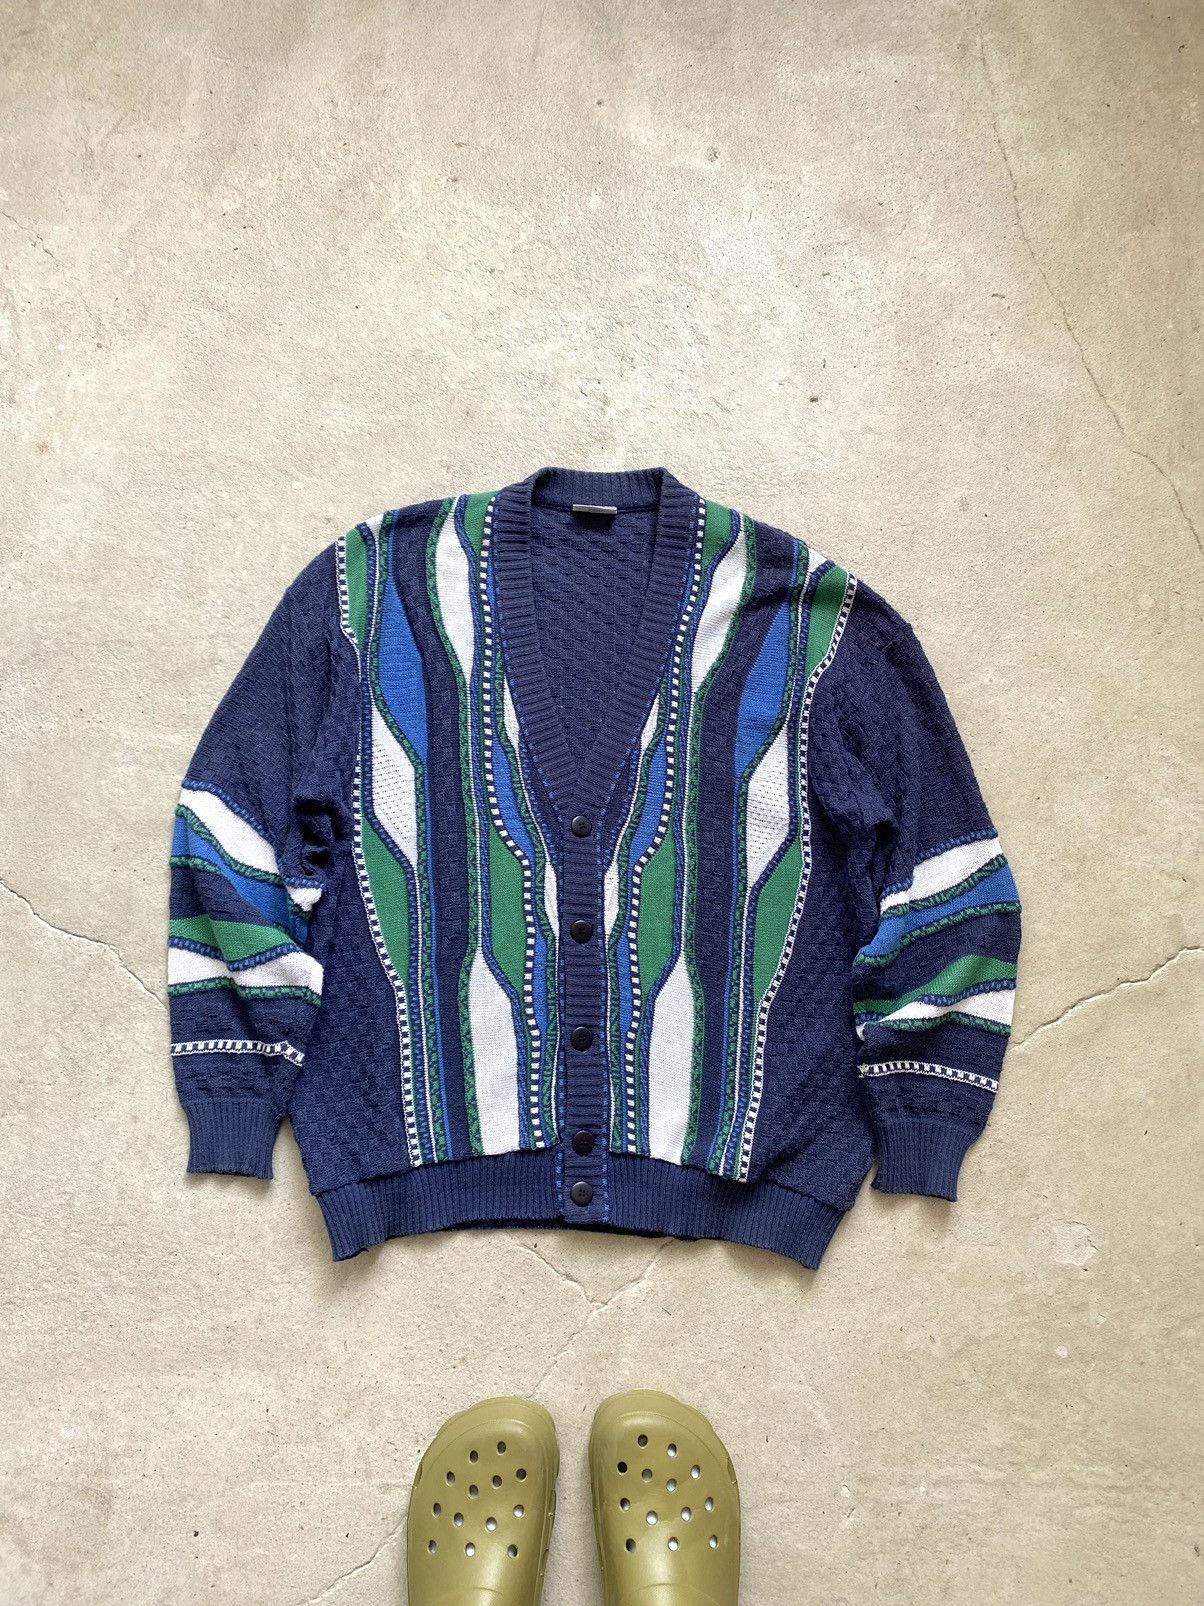 Pre-owned Cardigan X Vintage 90's Vintage Cardigan Knit Sweater Japan Coogi Style In Navy